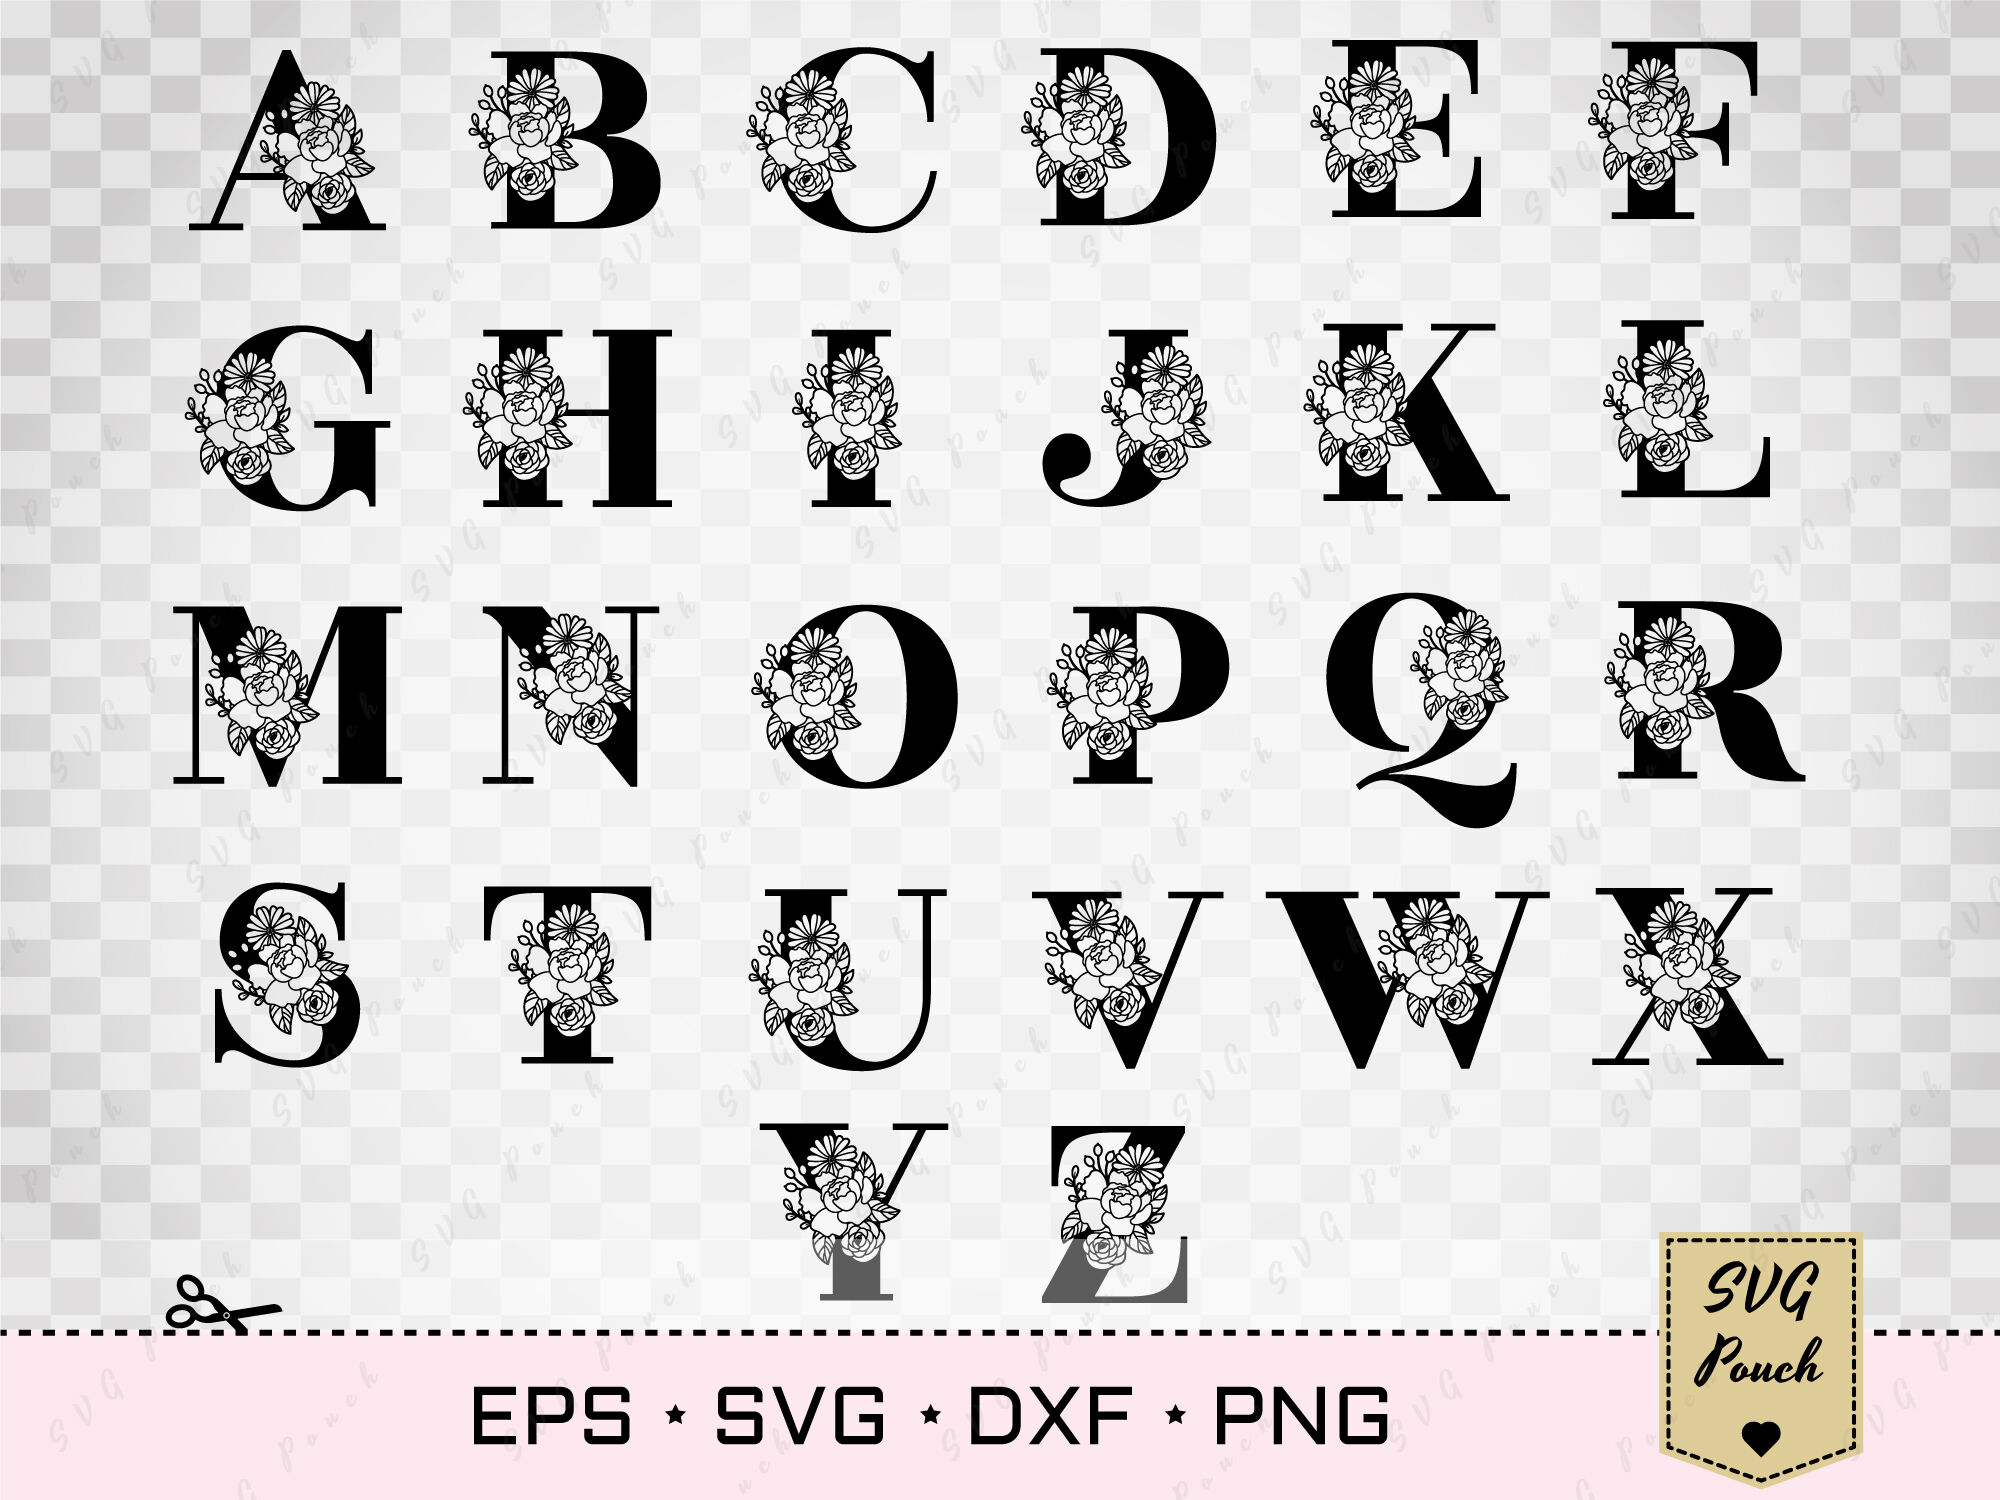 Full Alphabet Floral Monogram Font Initial Svg By Svgpouch Thehungryjpeg Com